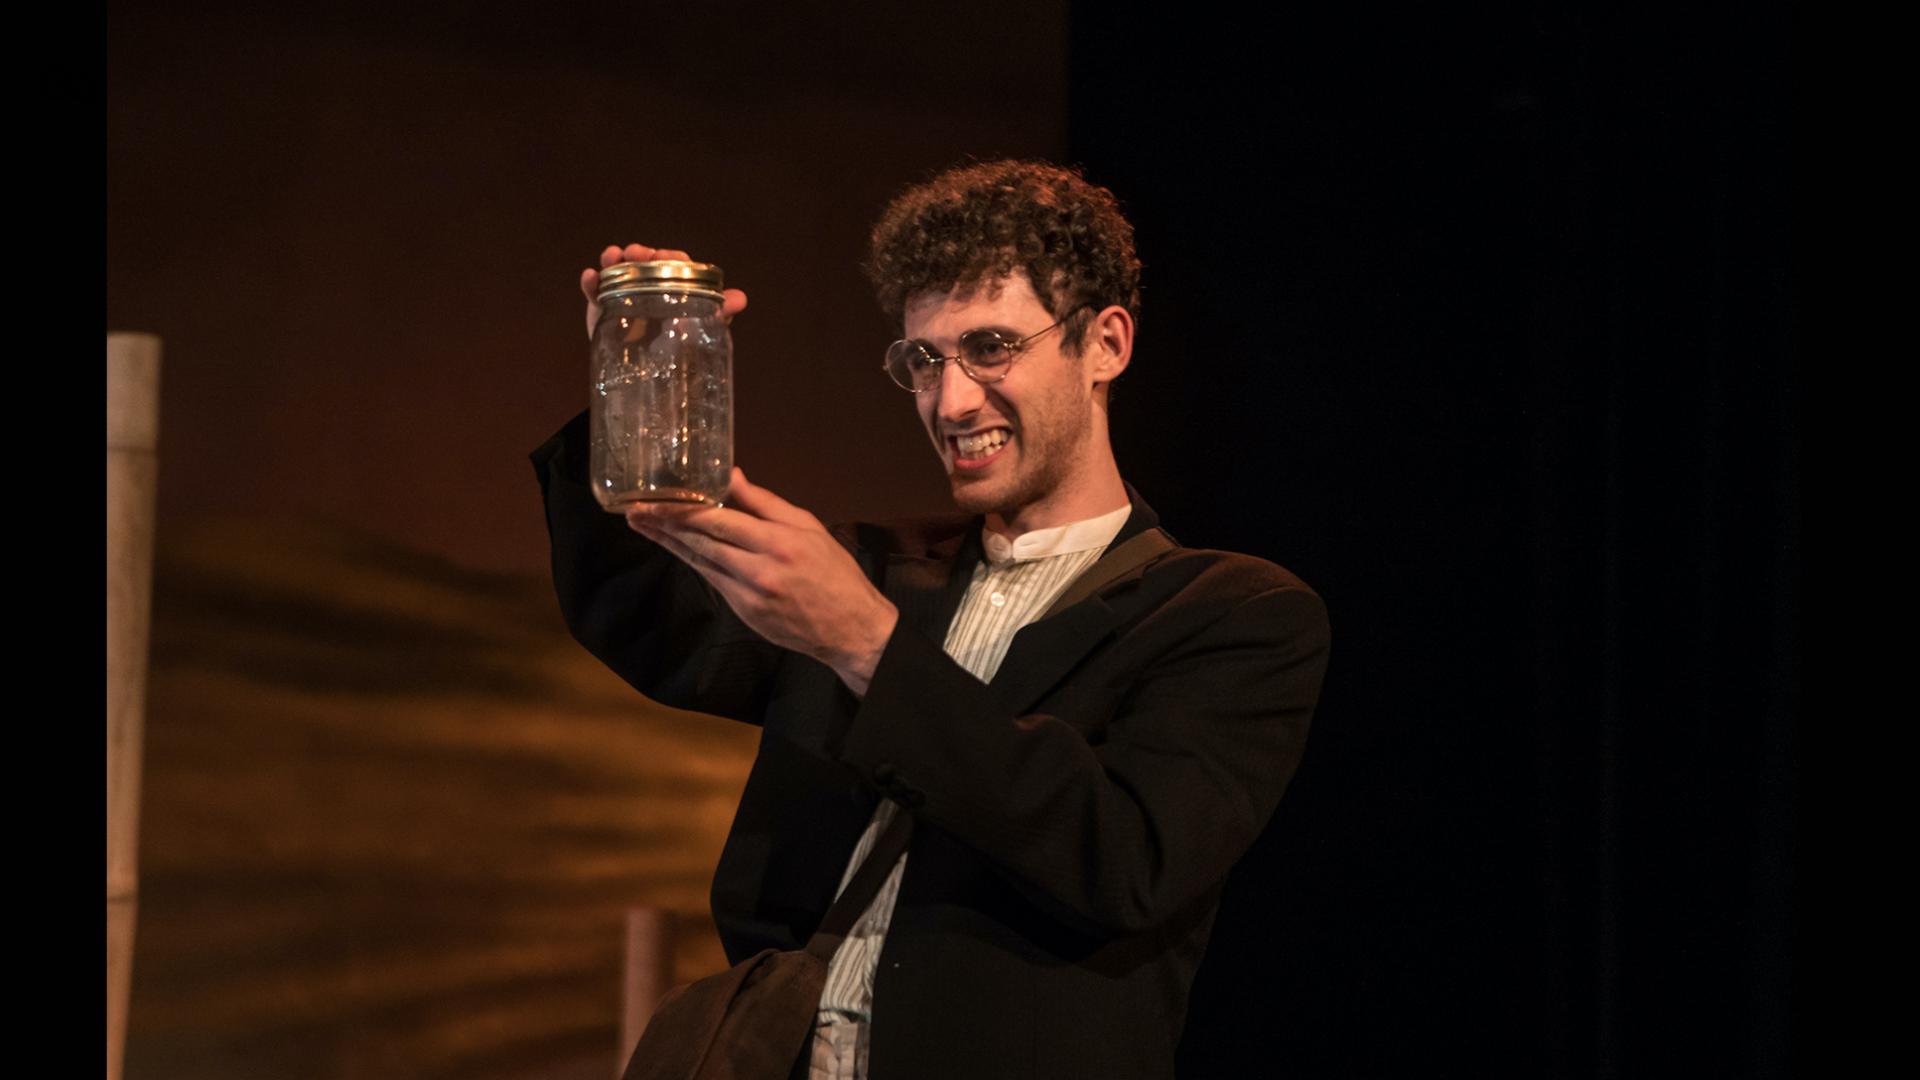 Actor playing Wallace holding a jar with a live butterfly in.